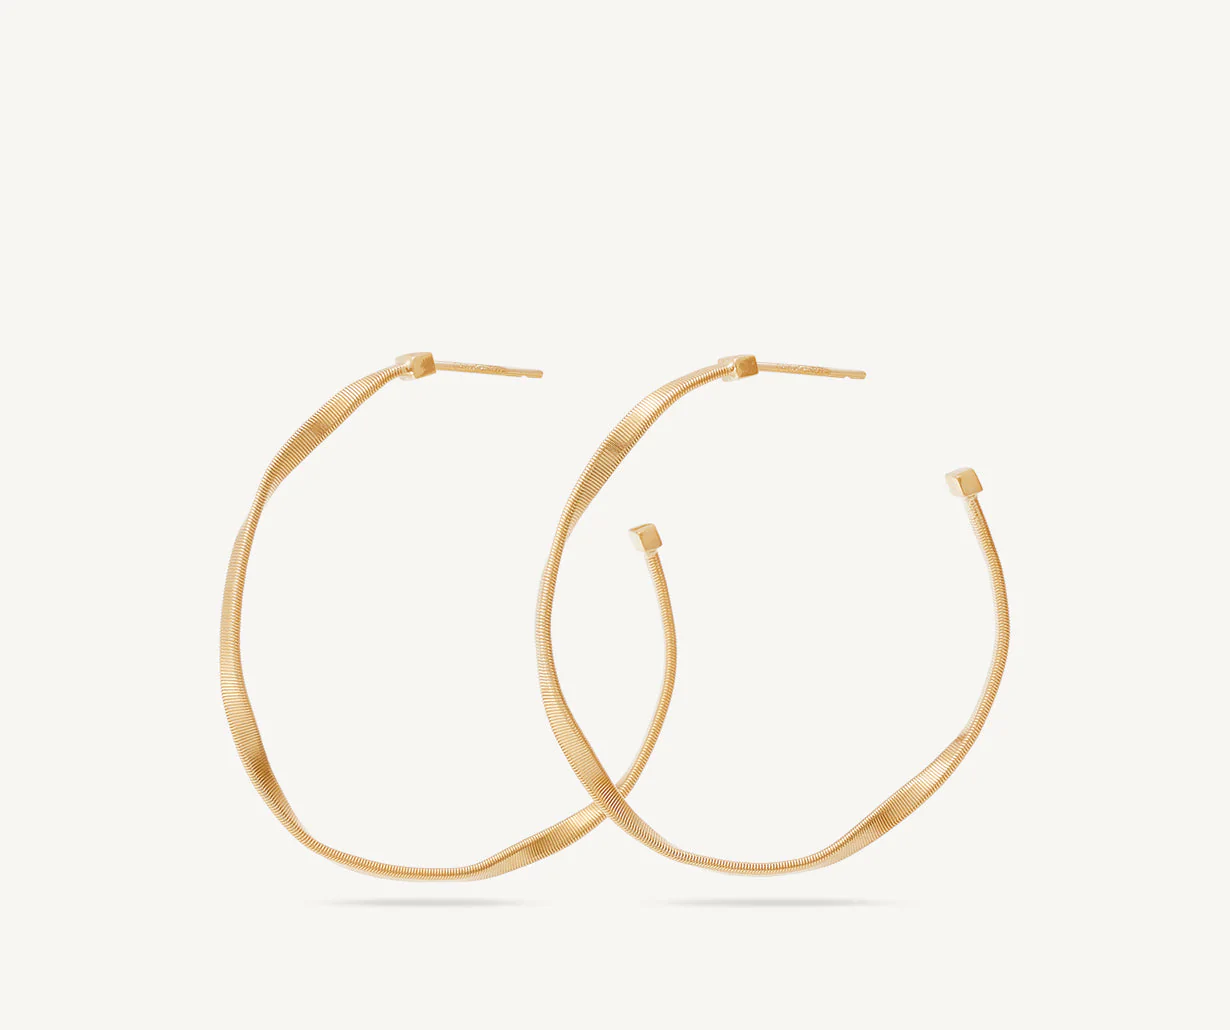 Profile of Marrakech hoops in 18k yellow gold by Marco Bicego 